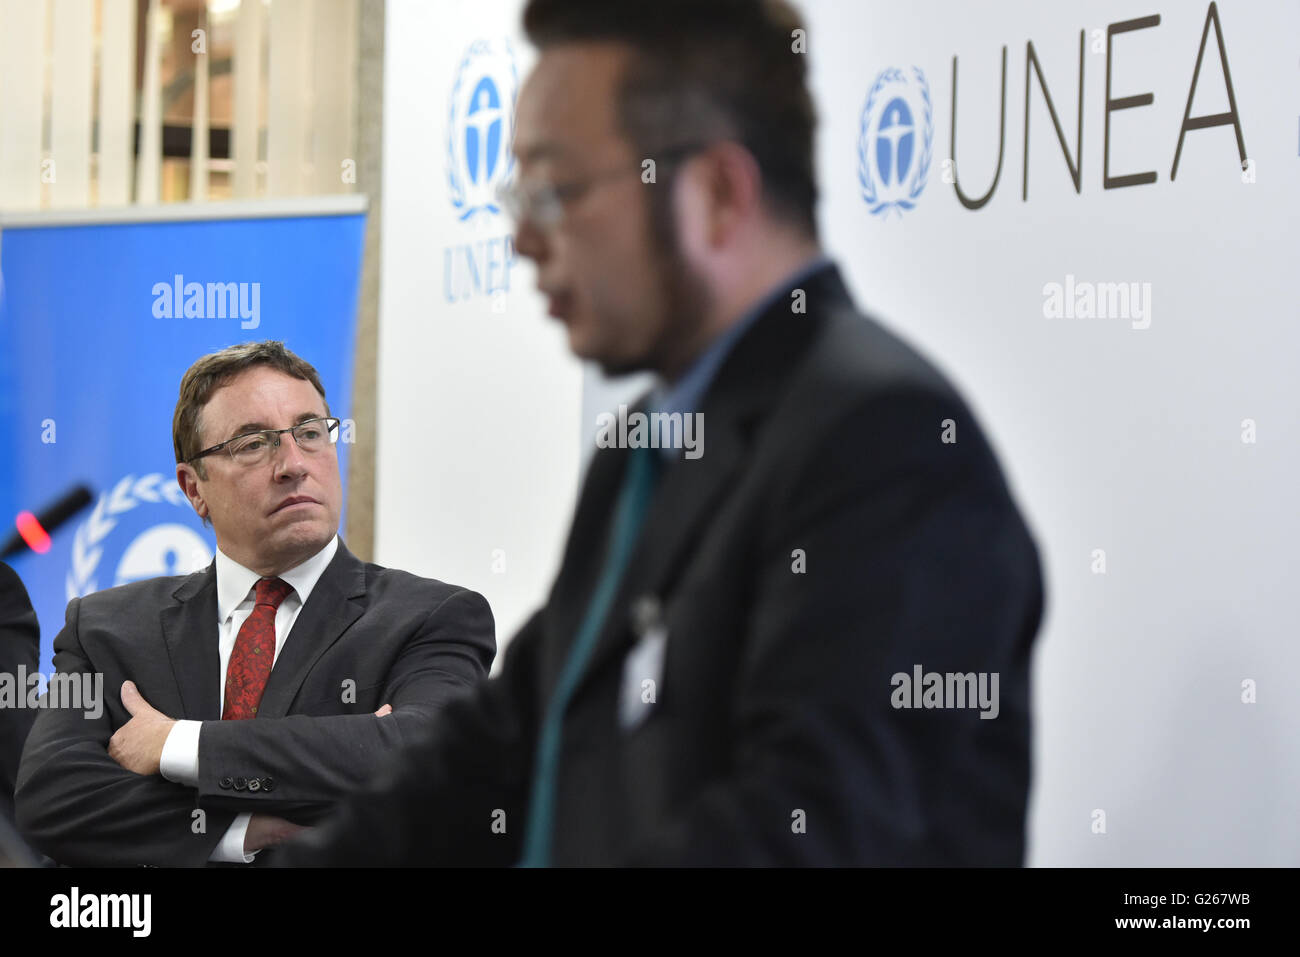 (160524)-- NAIROBI, May 24, 2016 (Xinhua)-- UNEP Executive Director Achim Steiner (L) listens to He Kebin, Dean at the School of Environment at the Tsingua University in China, who is introducing 'A Review of Air Pollution Control in Beijing: 1998-2013' during a press conference of the ongoing second edition of the United Nations Environment Assembly in Nairobi, Kenya, May 24, 2016. The United Nations Environmental Program (UNEP) has said there is need for governments to refashion policy interventions aimed at reducing air pollution. (Xinhua/Sun Ruibo) Stock Photo